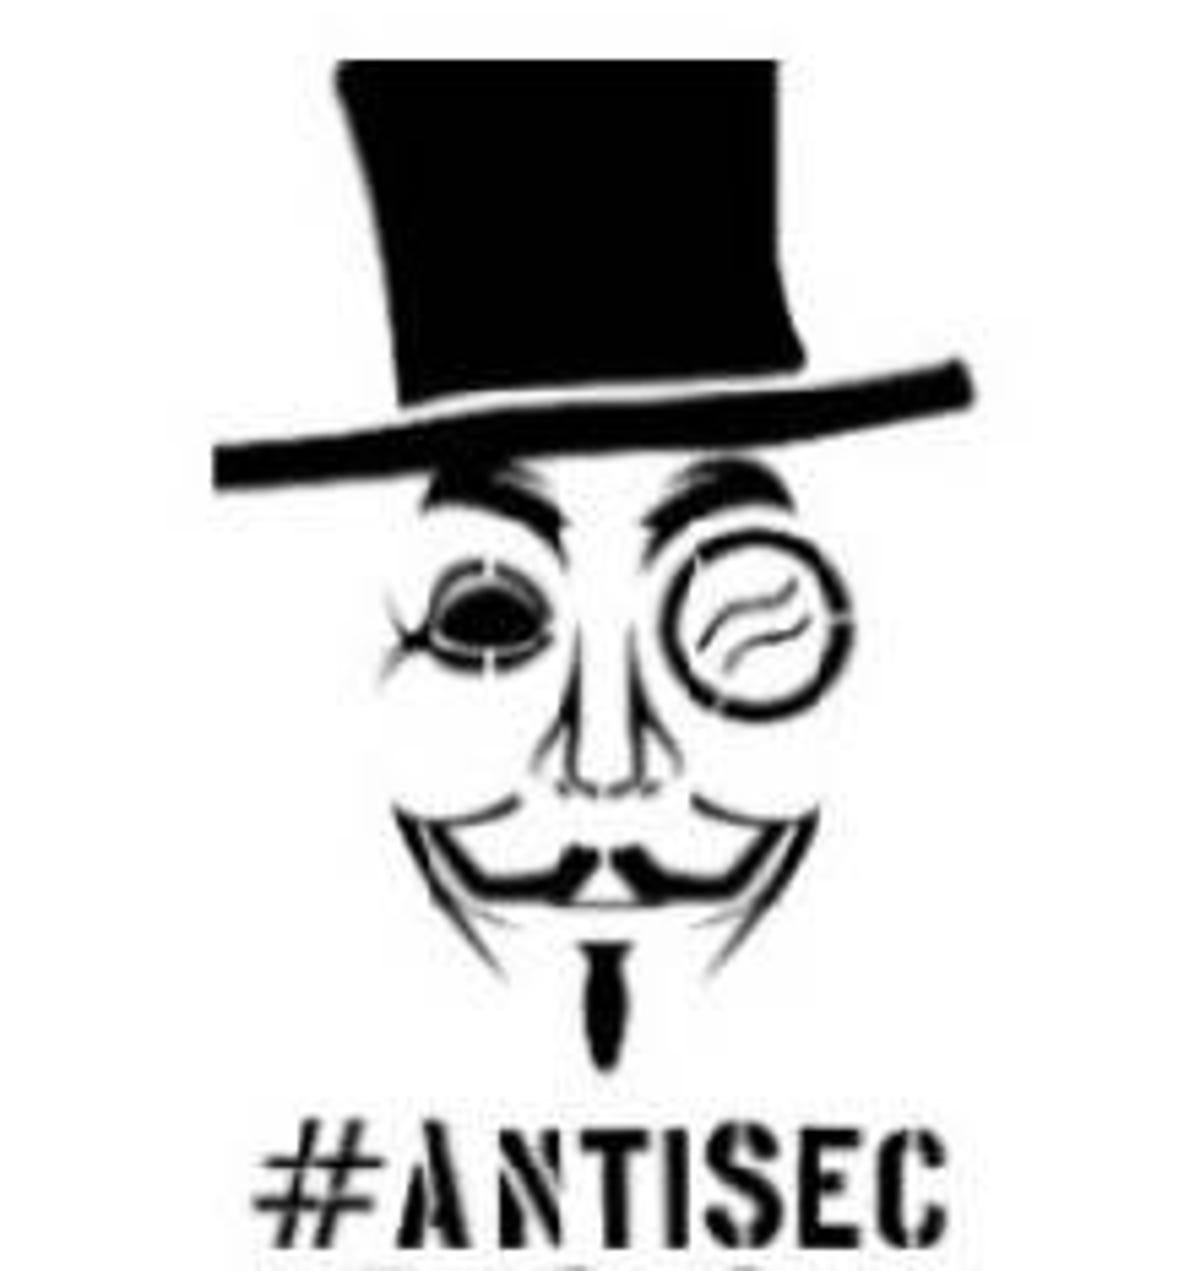 The AntiSec campaign aims to attack government, financial and other high-profile targets.